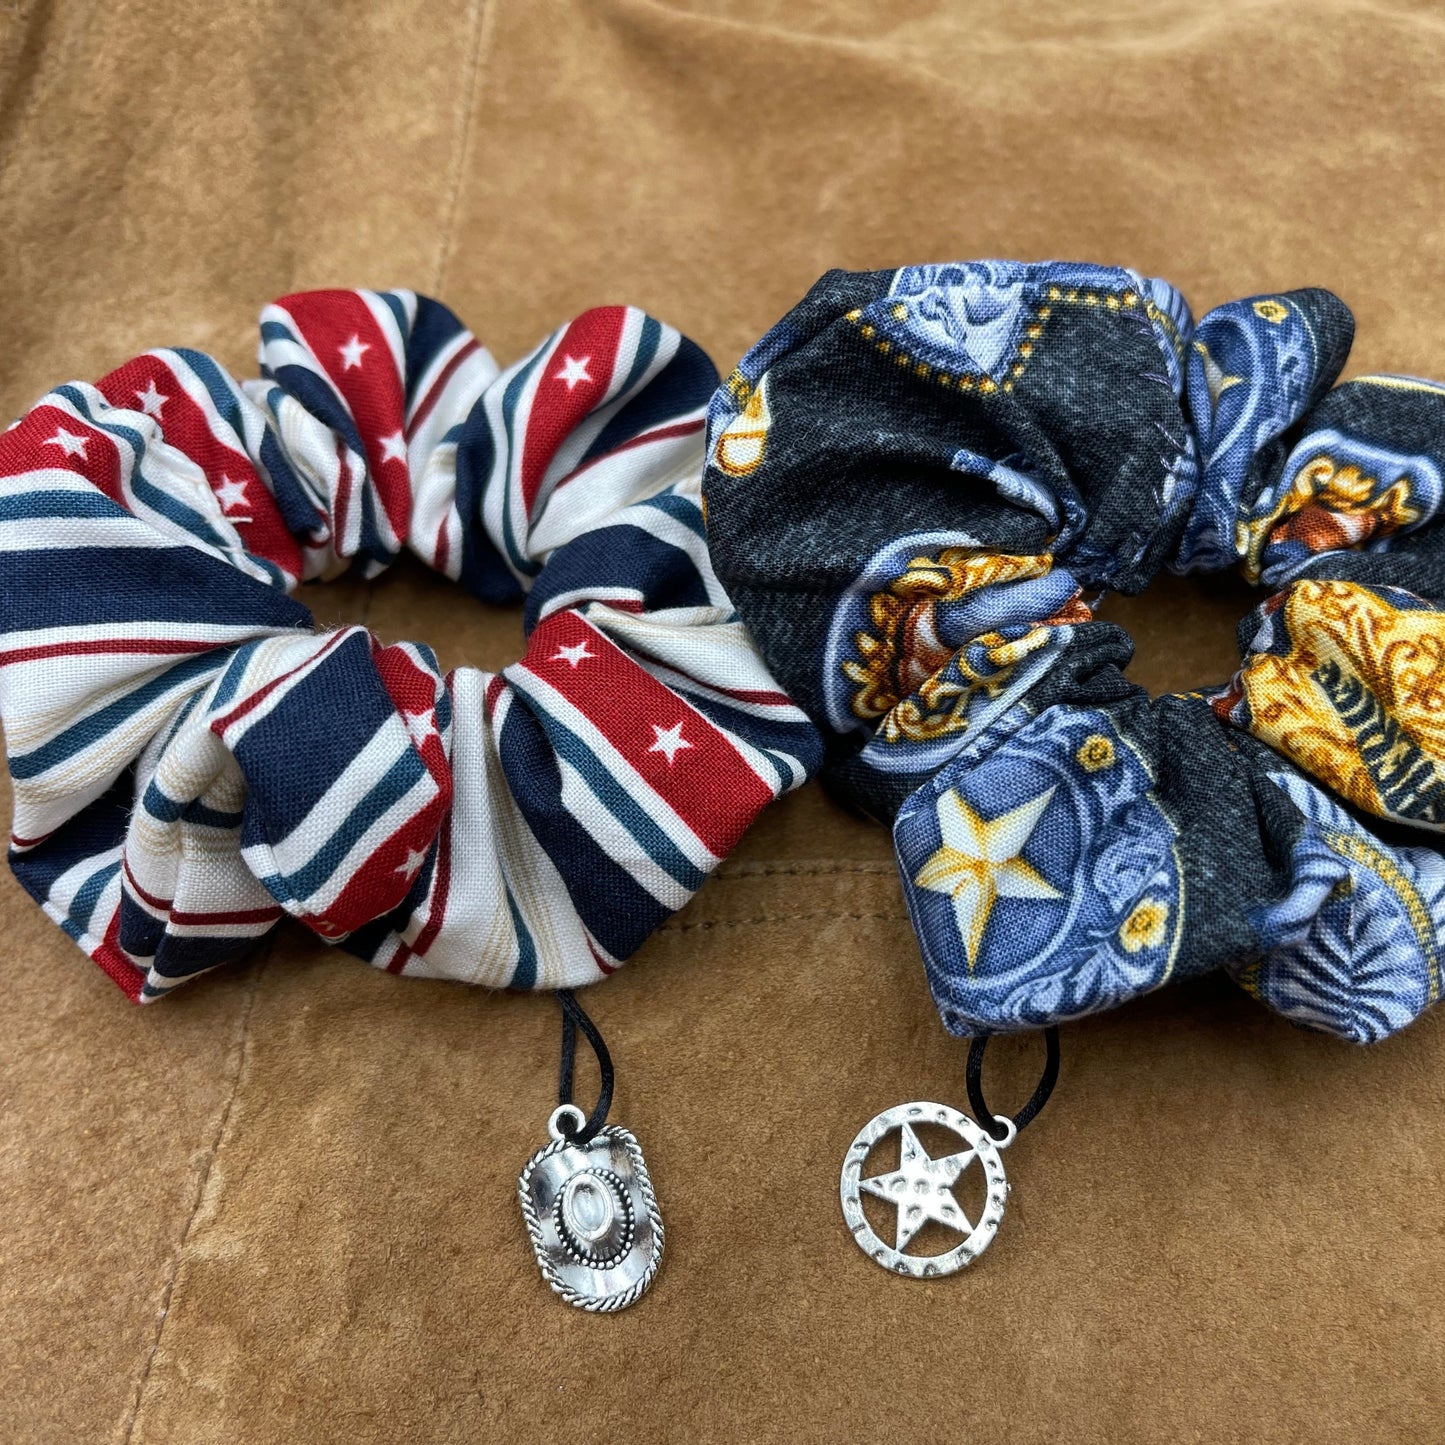 Two scrunchies side by side against a brown leather jacket. The left scrunchie has a red white and blue pattern with stars. A charm shaped like a cowboy hat is attached to the fabric. The right scrunchie is blue with a pattern of sheriff badges. Attached to the fabric is a charm shaped like a sheriff's badge.